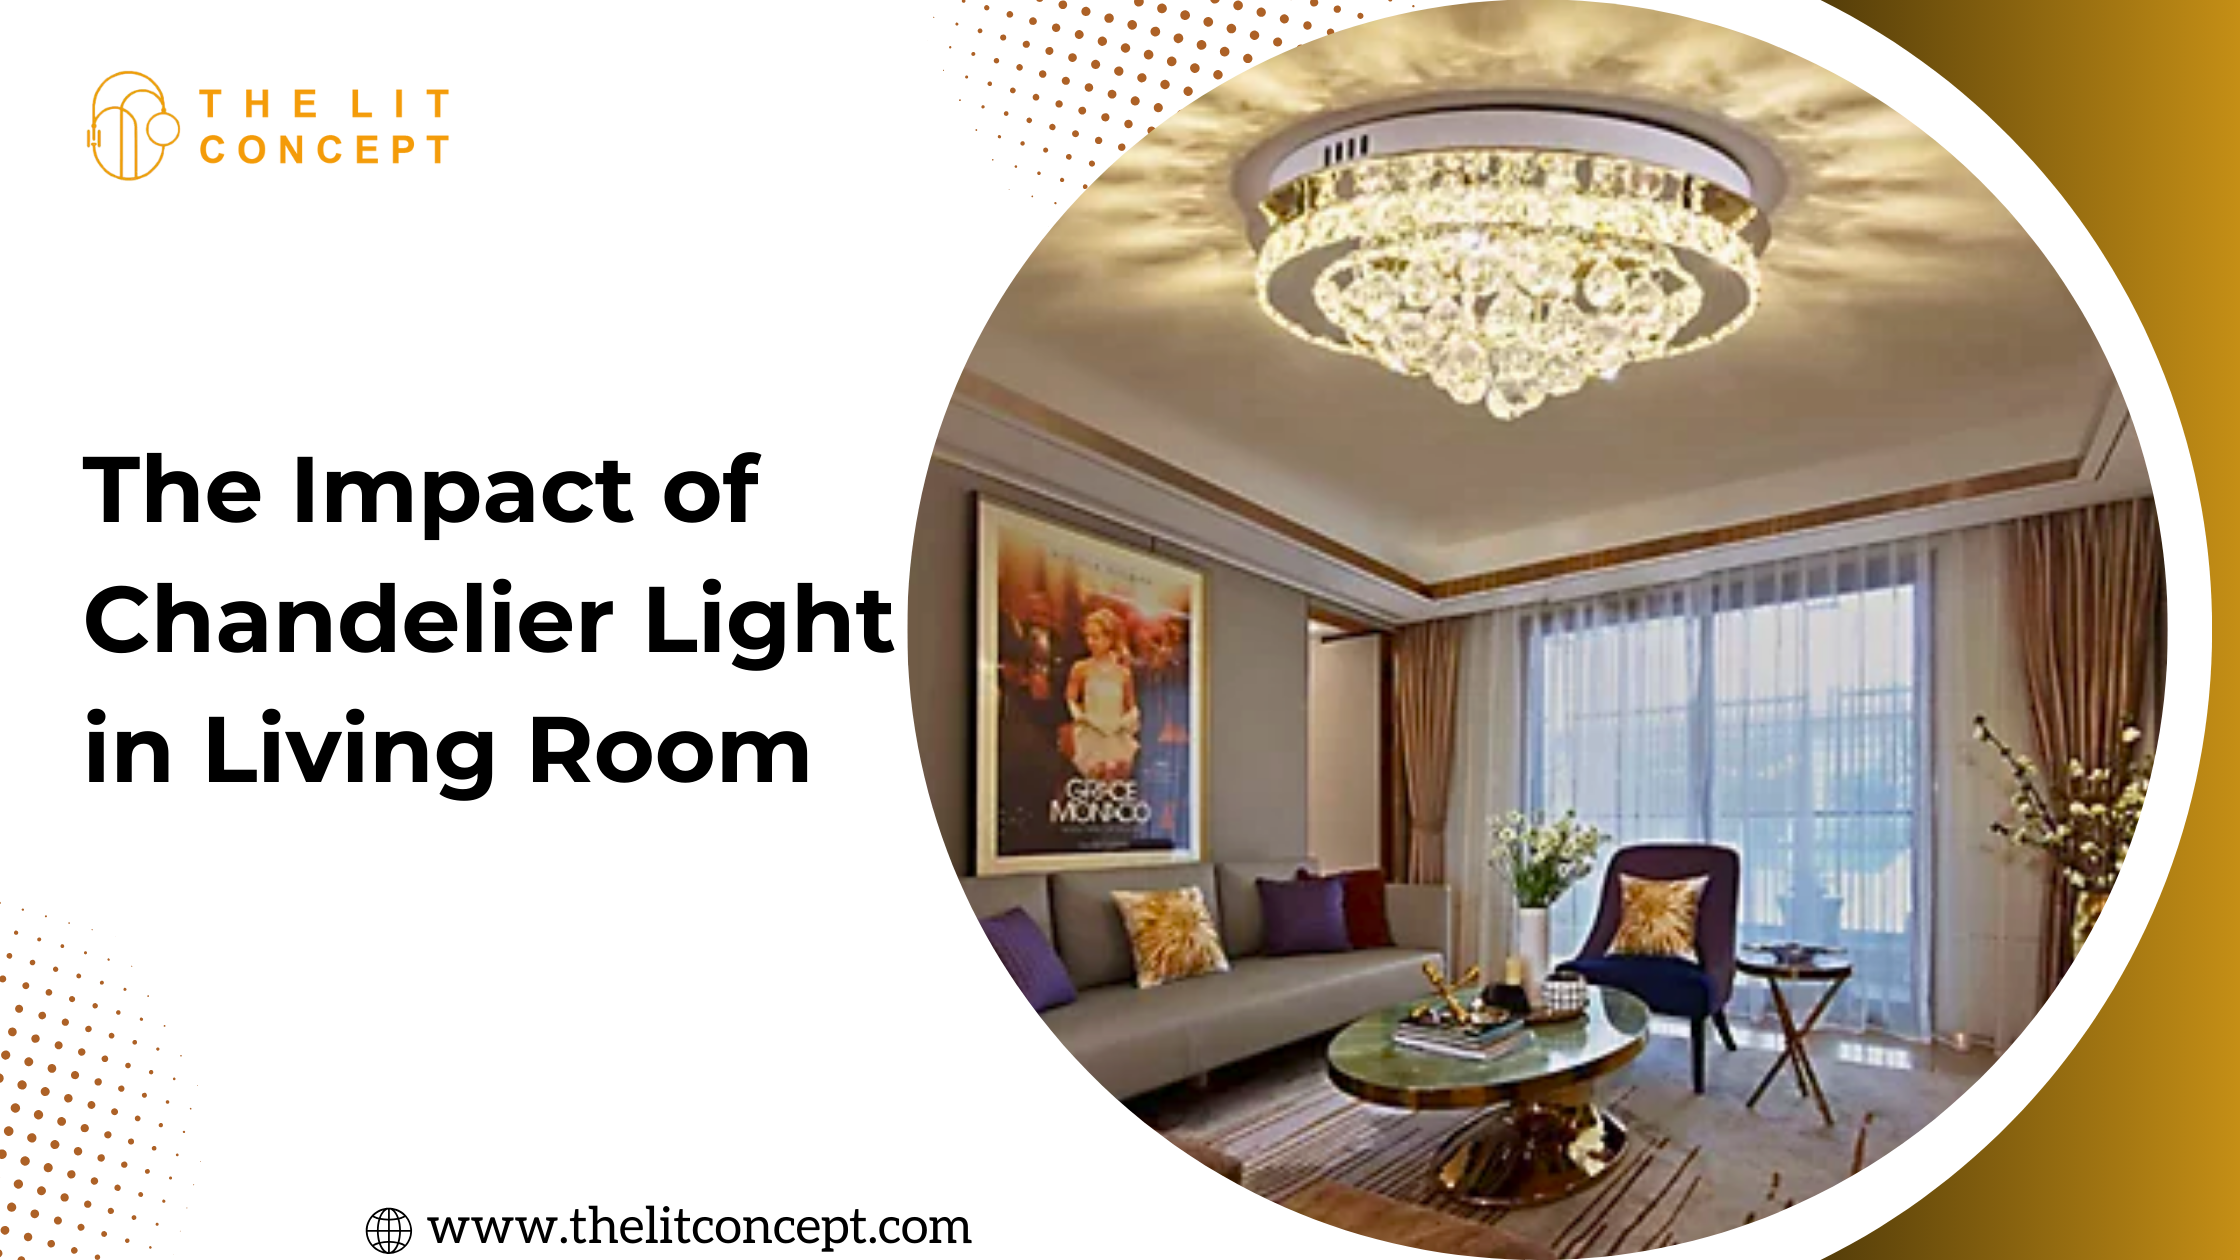 The Impact of Chandelier Light in Living Room